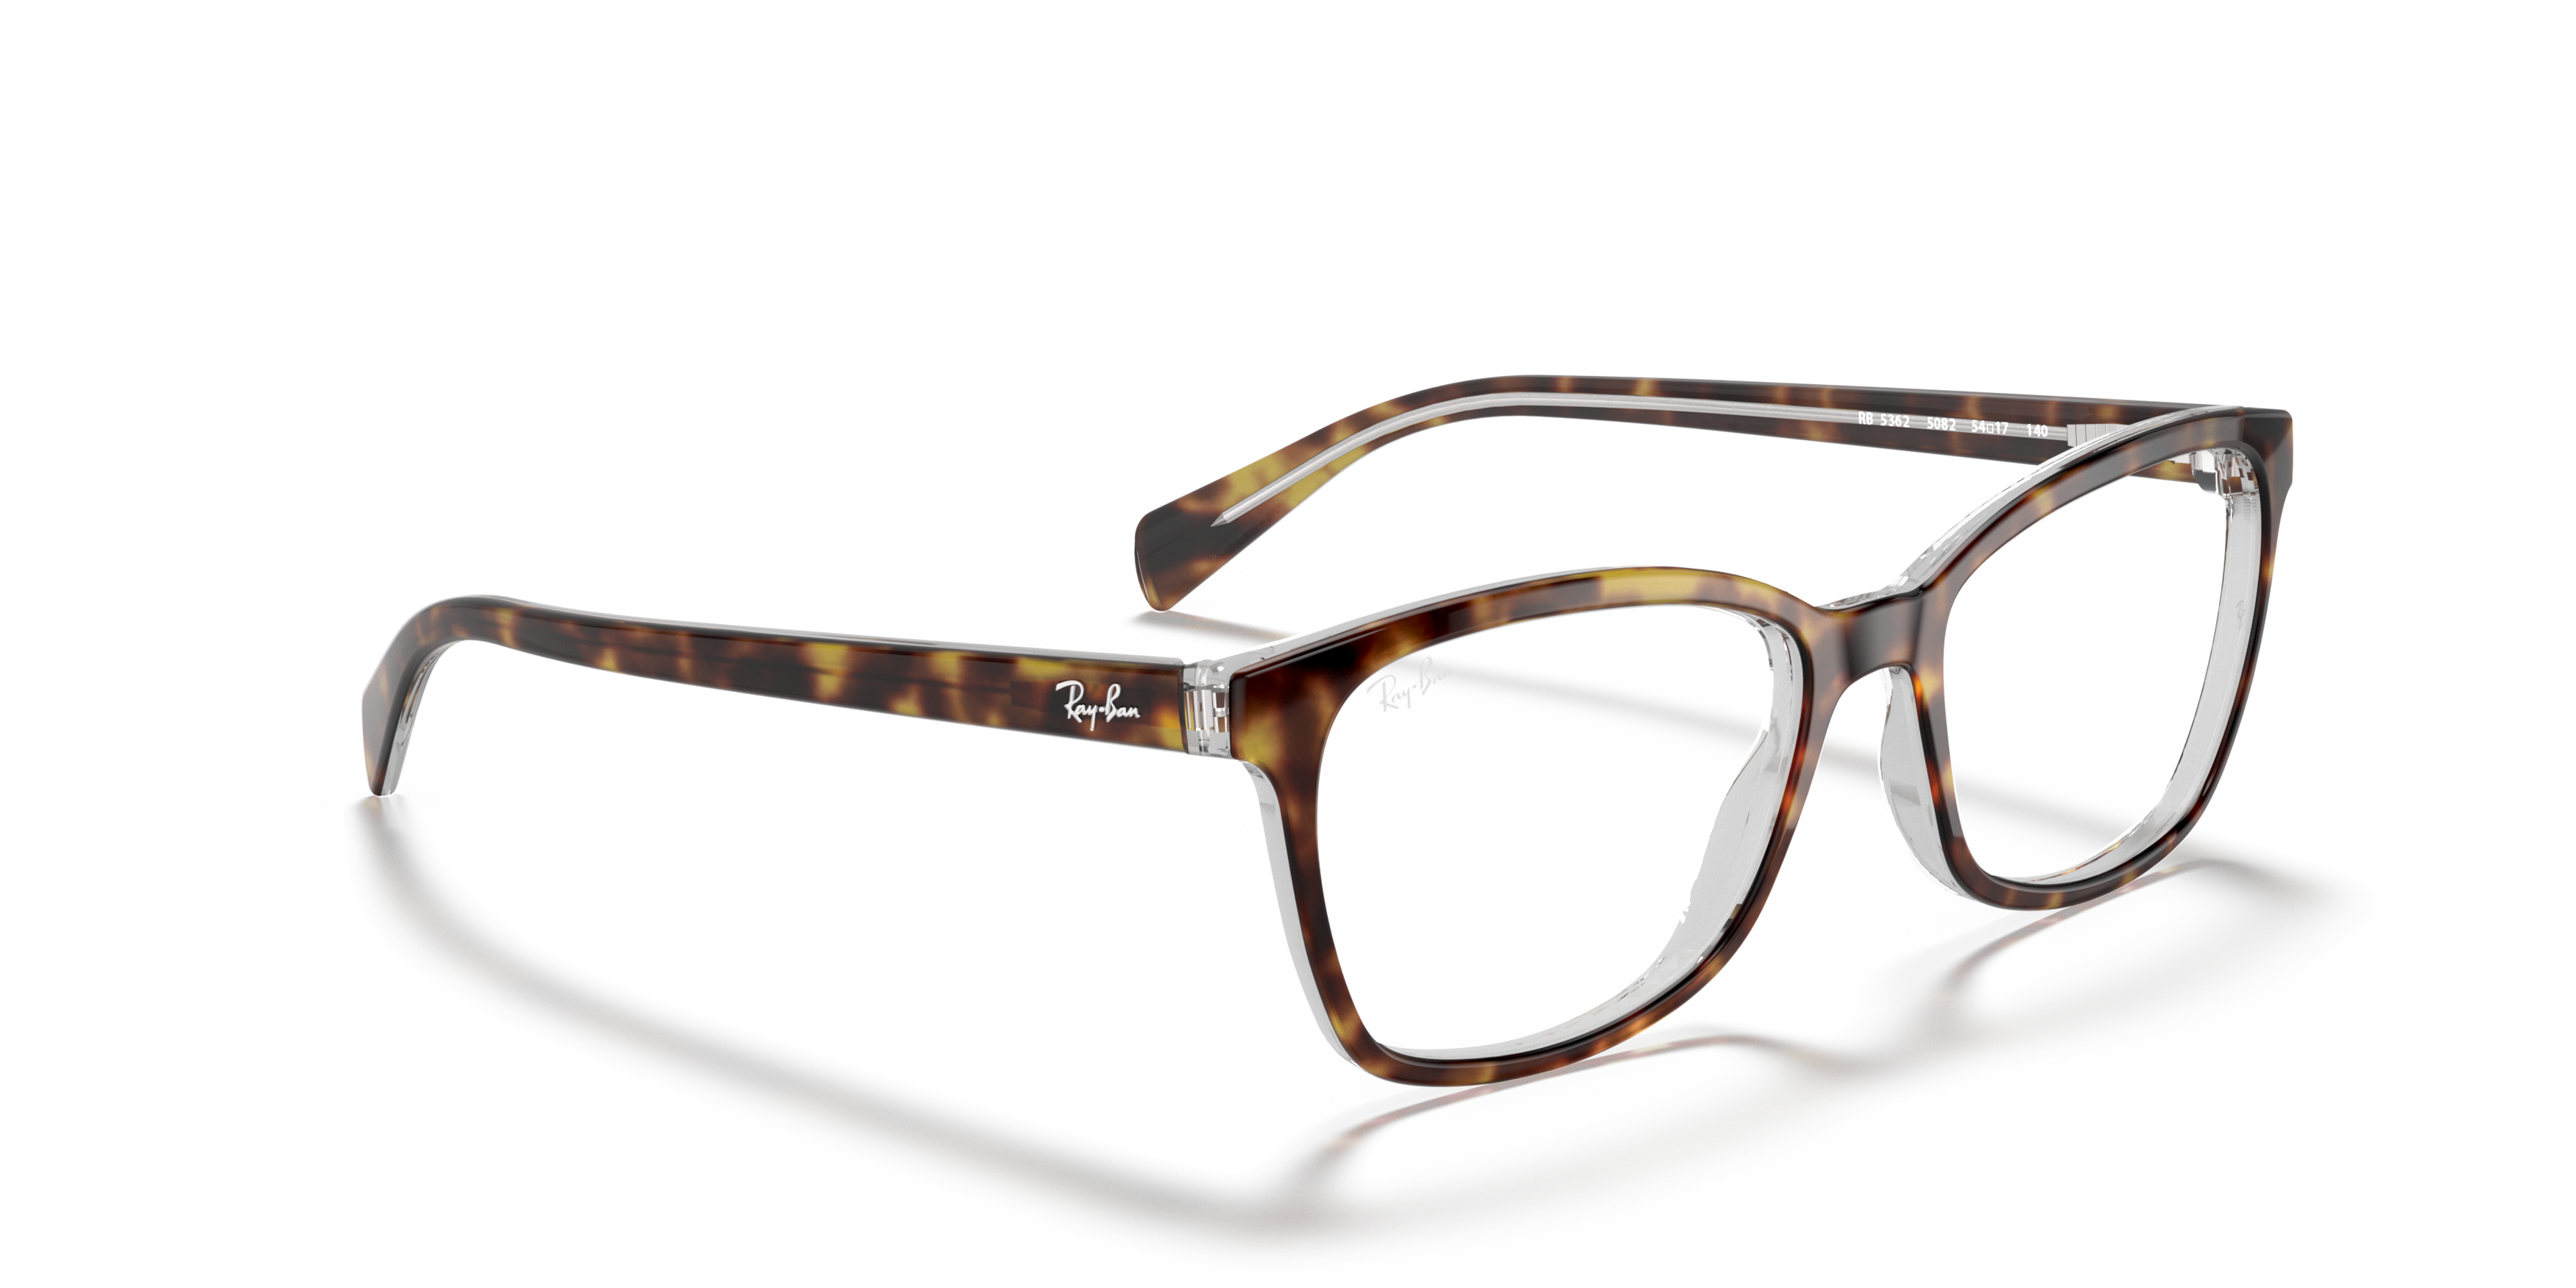 Angle_Right01 Ray-Ban RX 5362 (5082) Glasses Transparent / Tortoise Shell